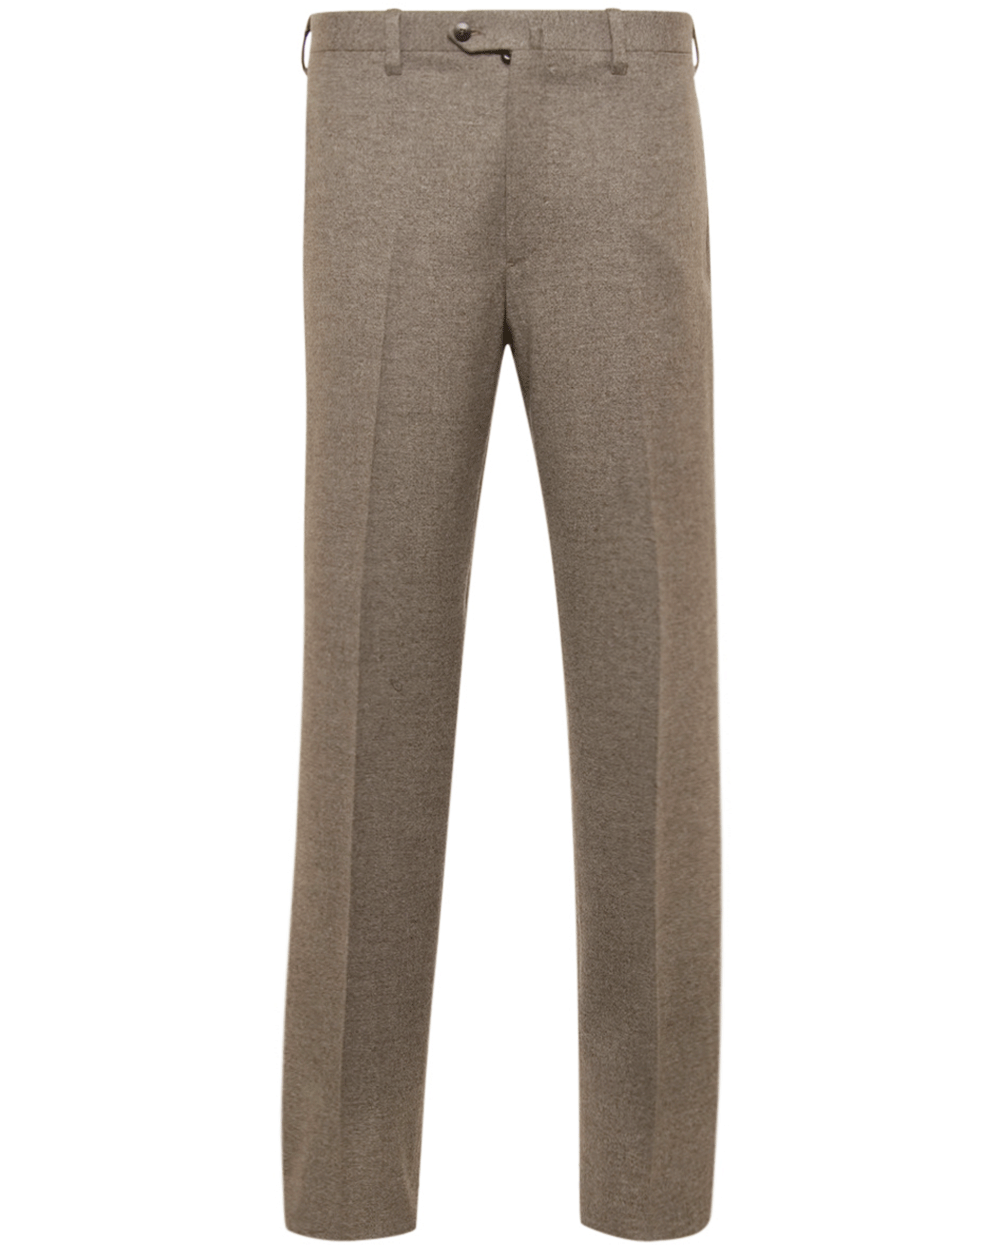 Oatmeal Wool Donegal Pant